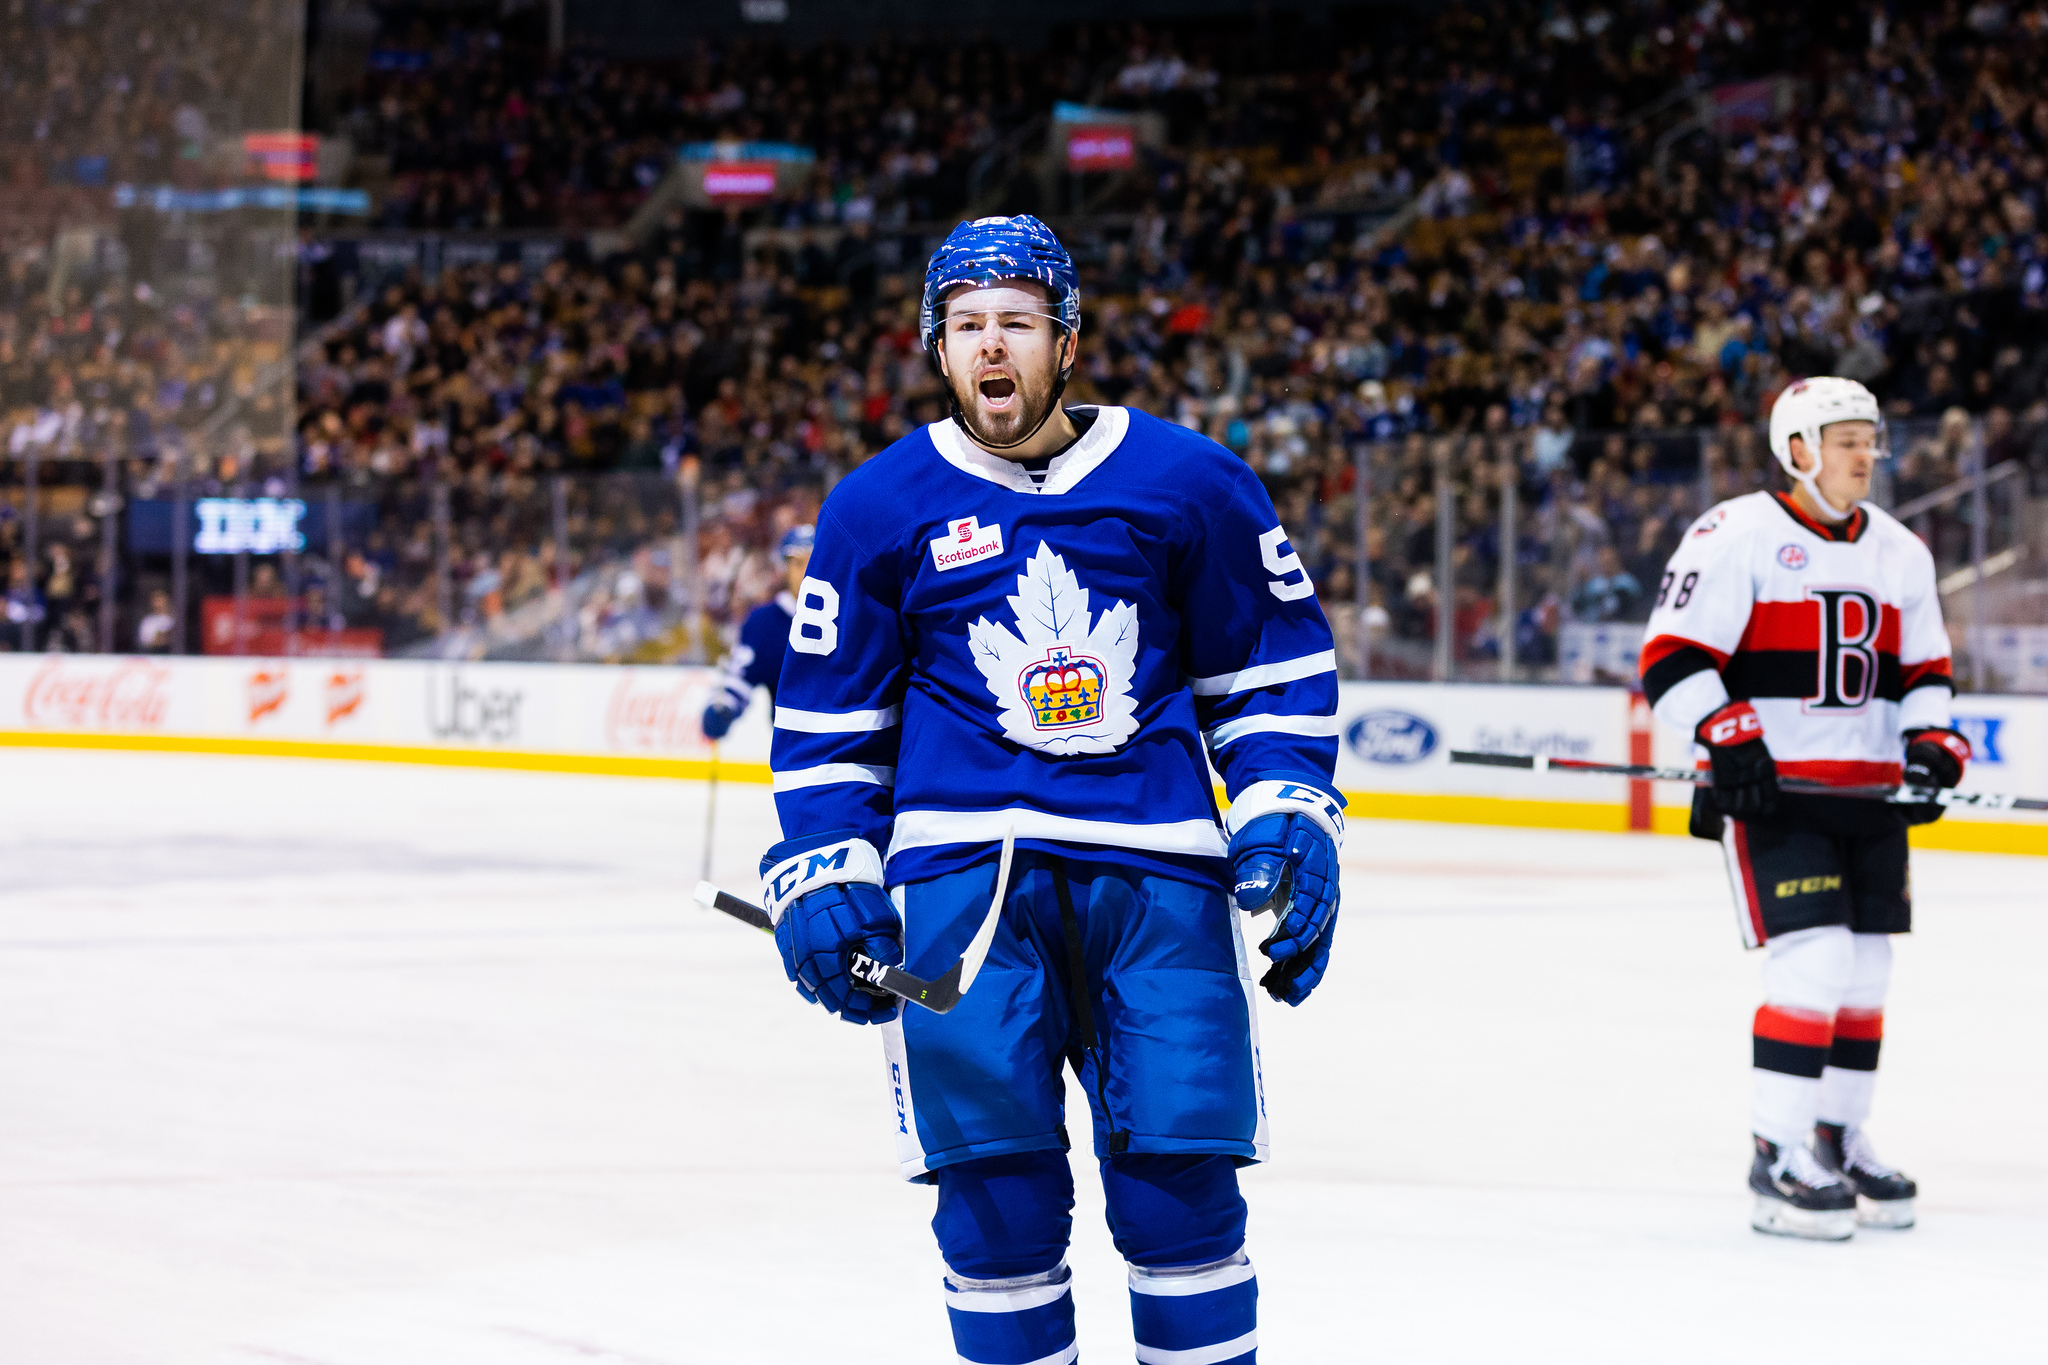 Michael Carcone of the Toronto Marlies